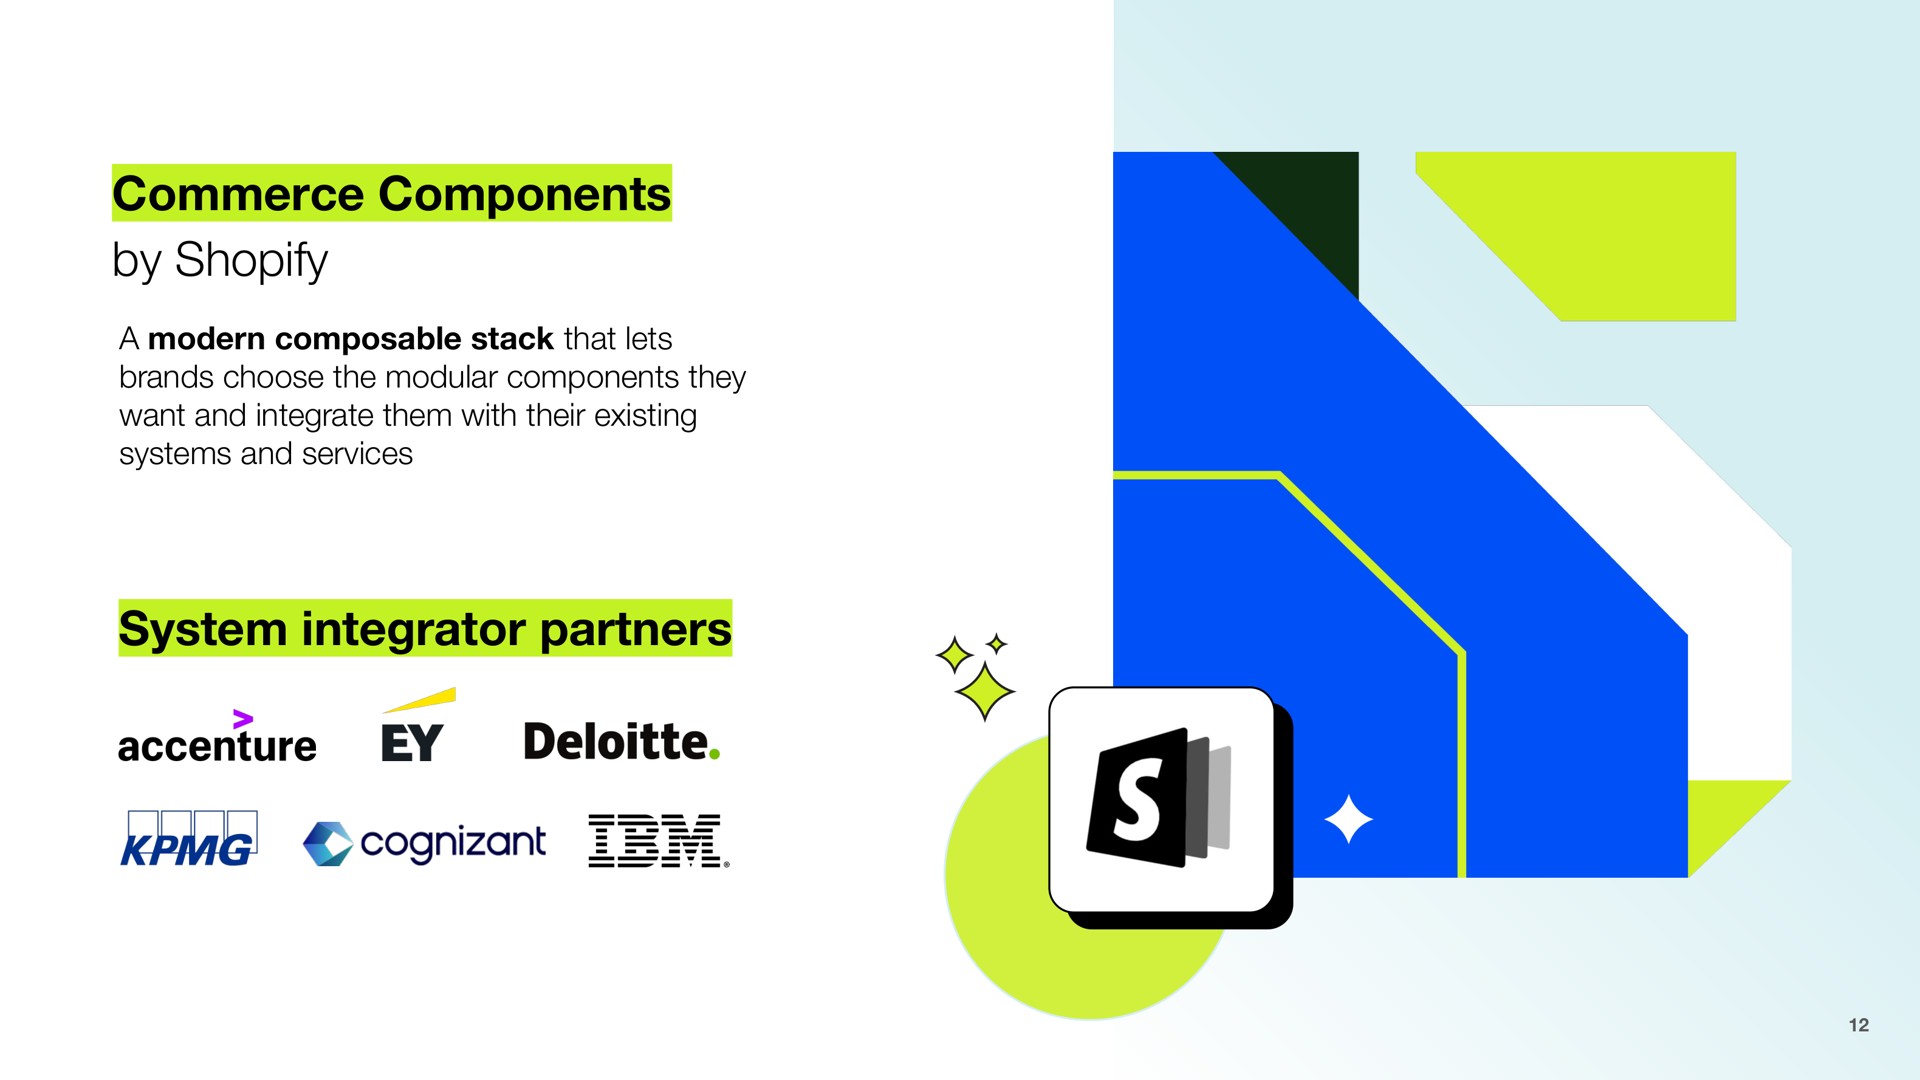 commerce components by system integrator partners cognizant | Shopify